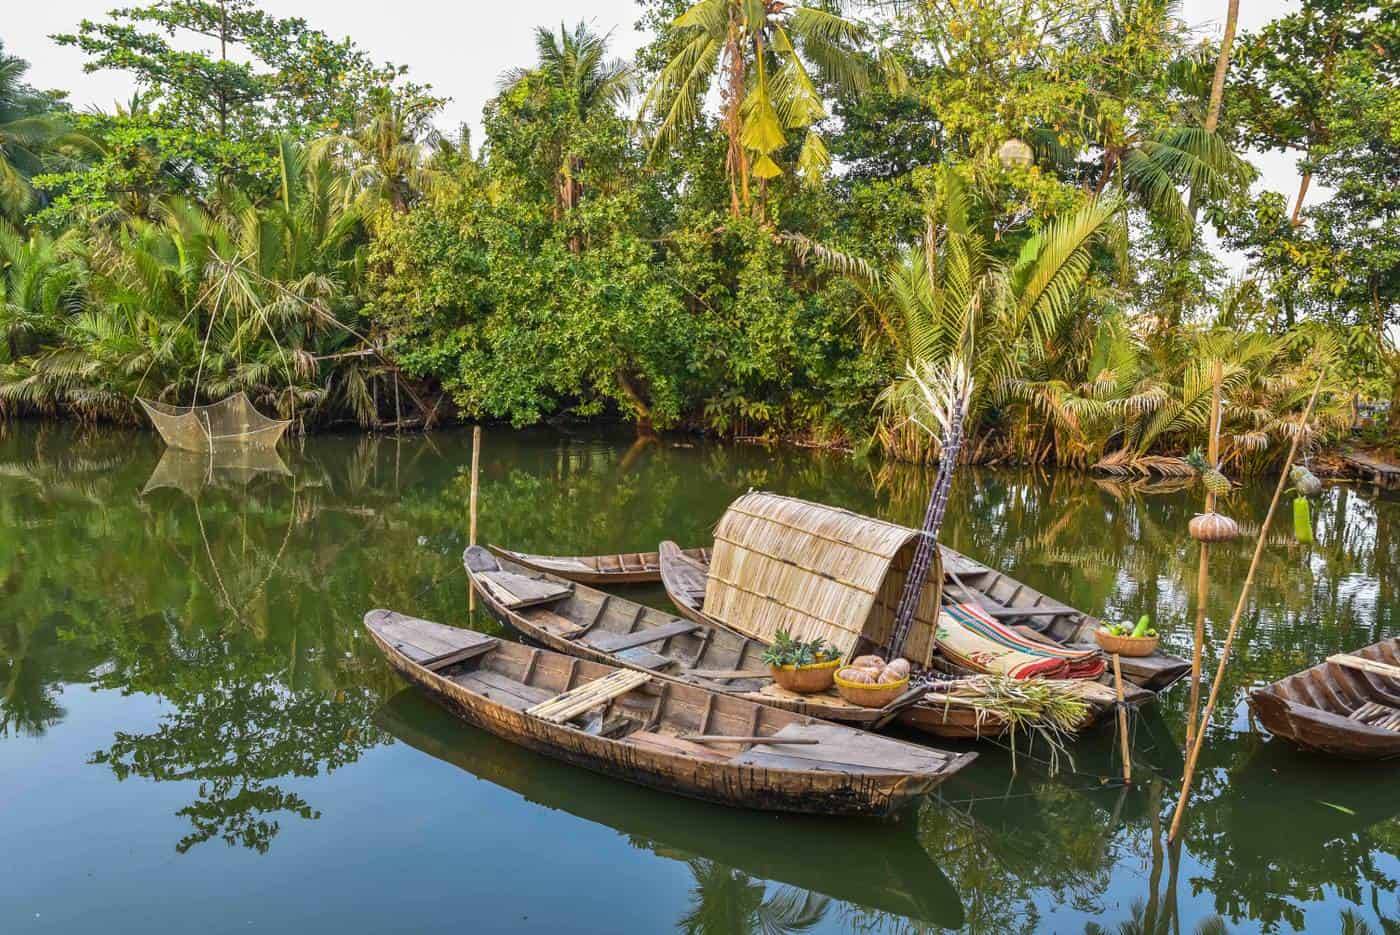 THE TIMELESS CHARM OF MEKONG DELTA